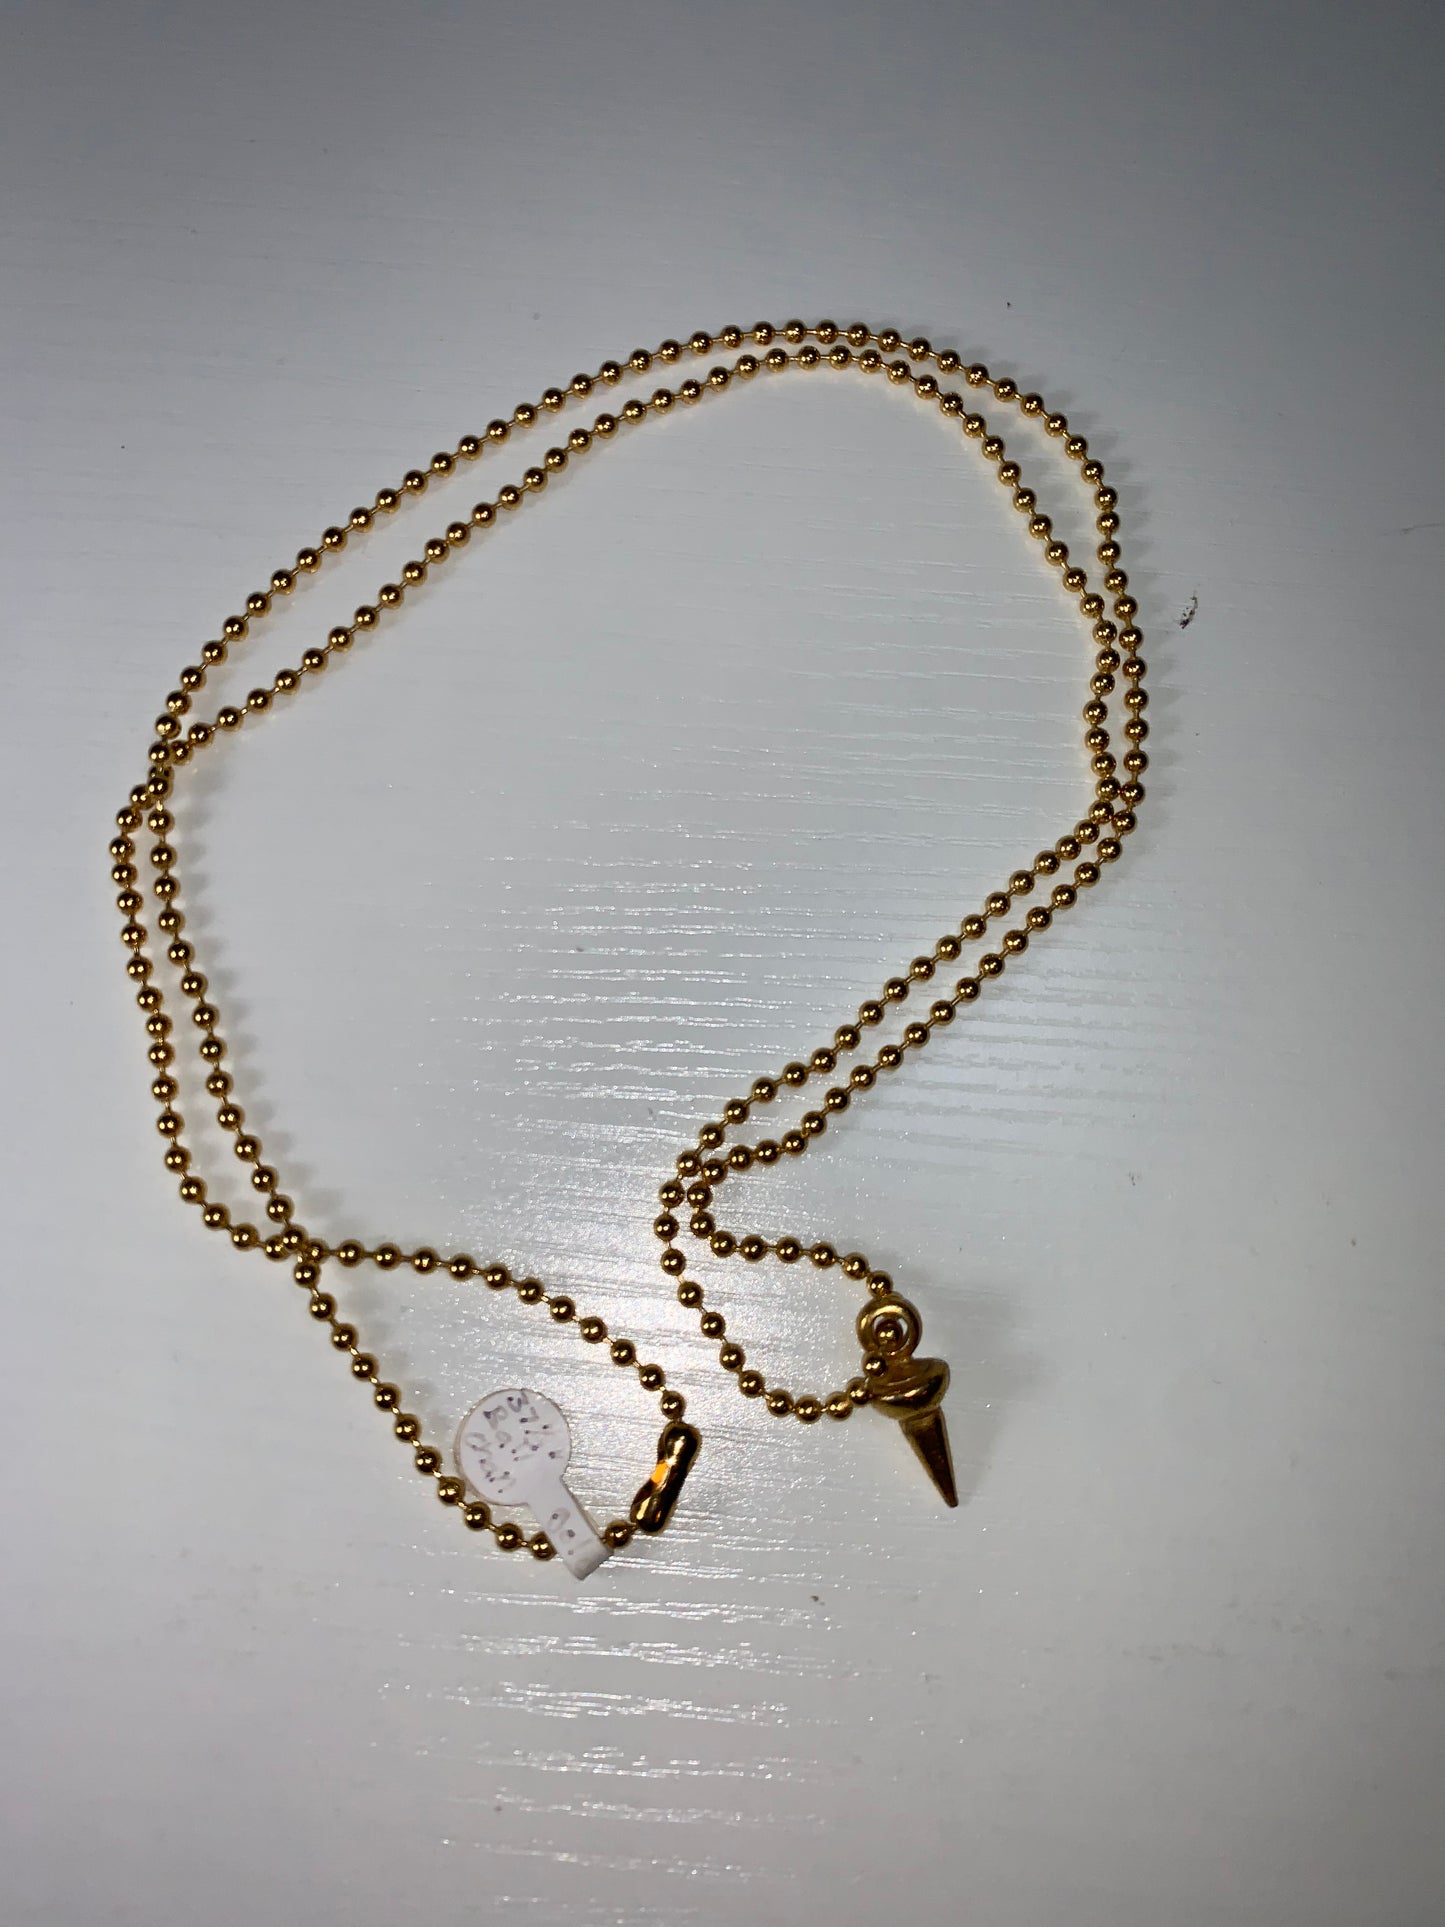 37 1/2" Vintage Monet 3mm Gold Tone Ball Chain necklace and Pendulum Pendant.